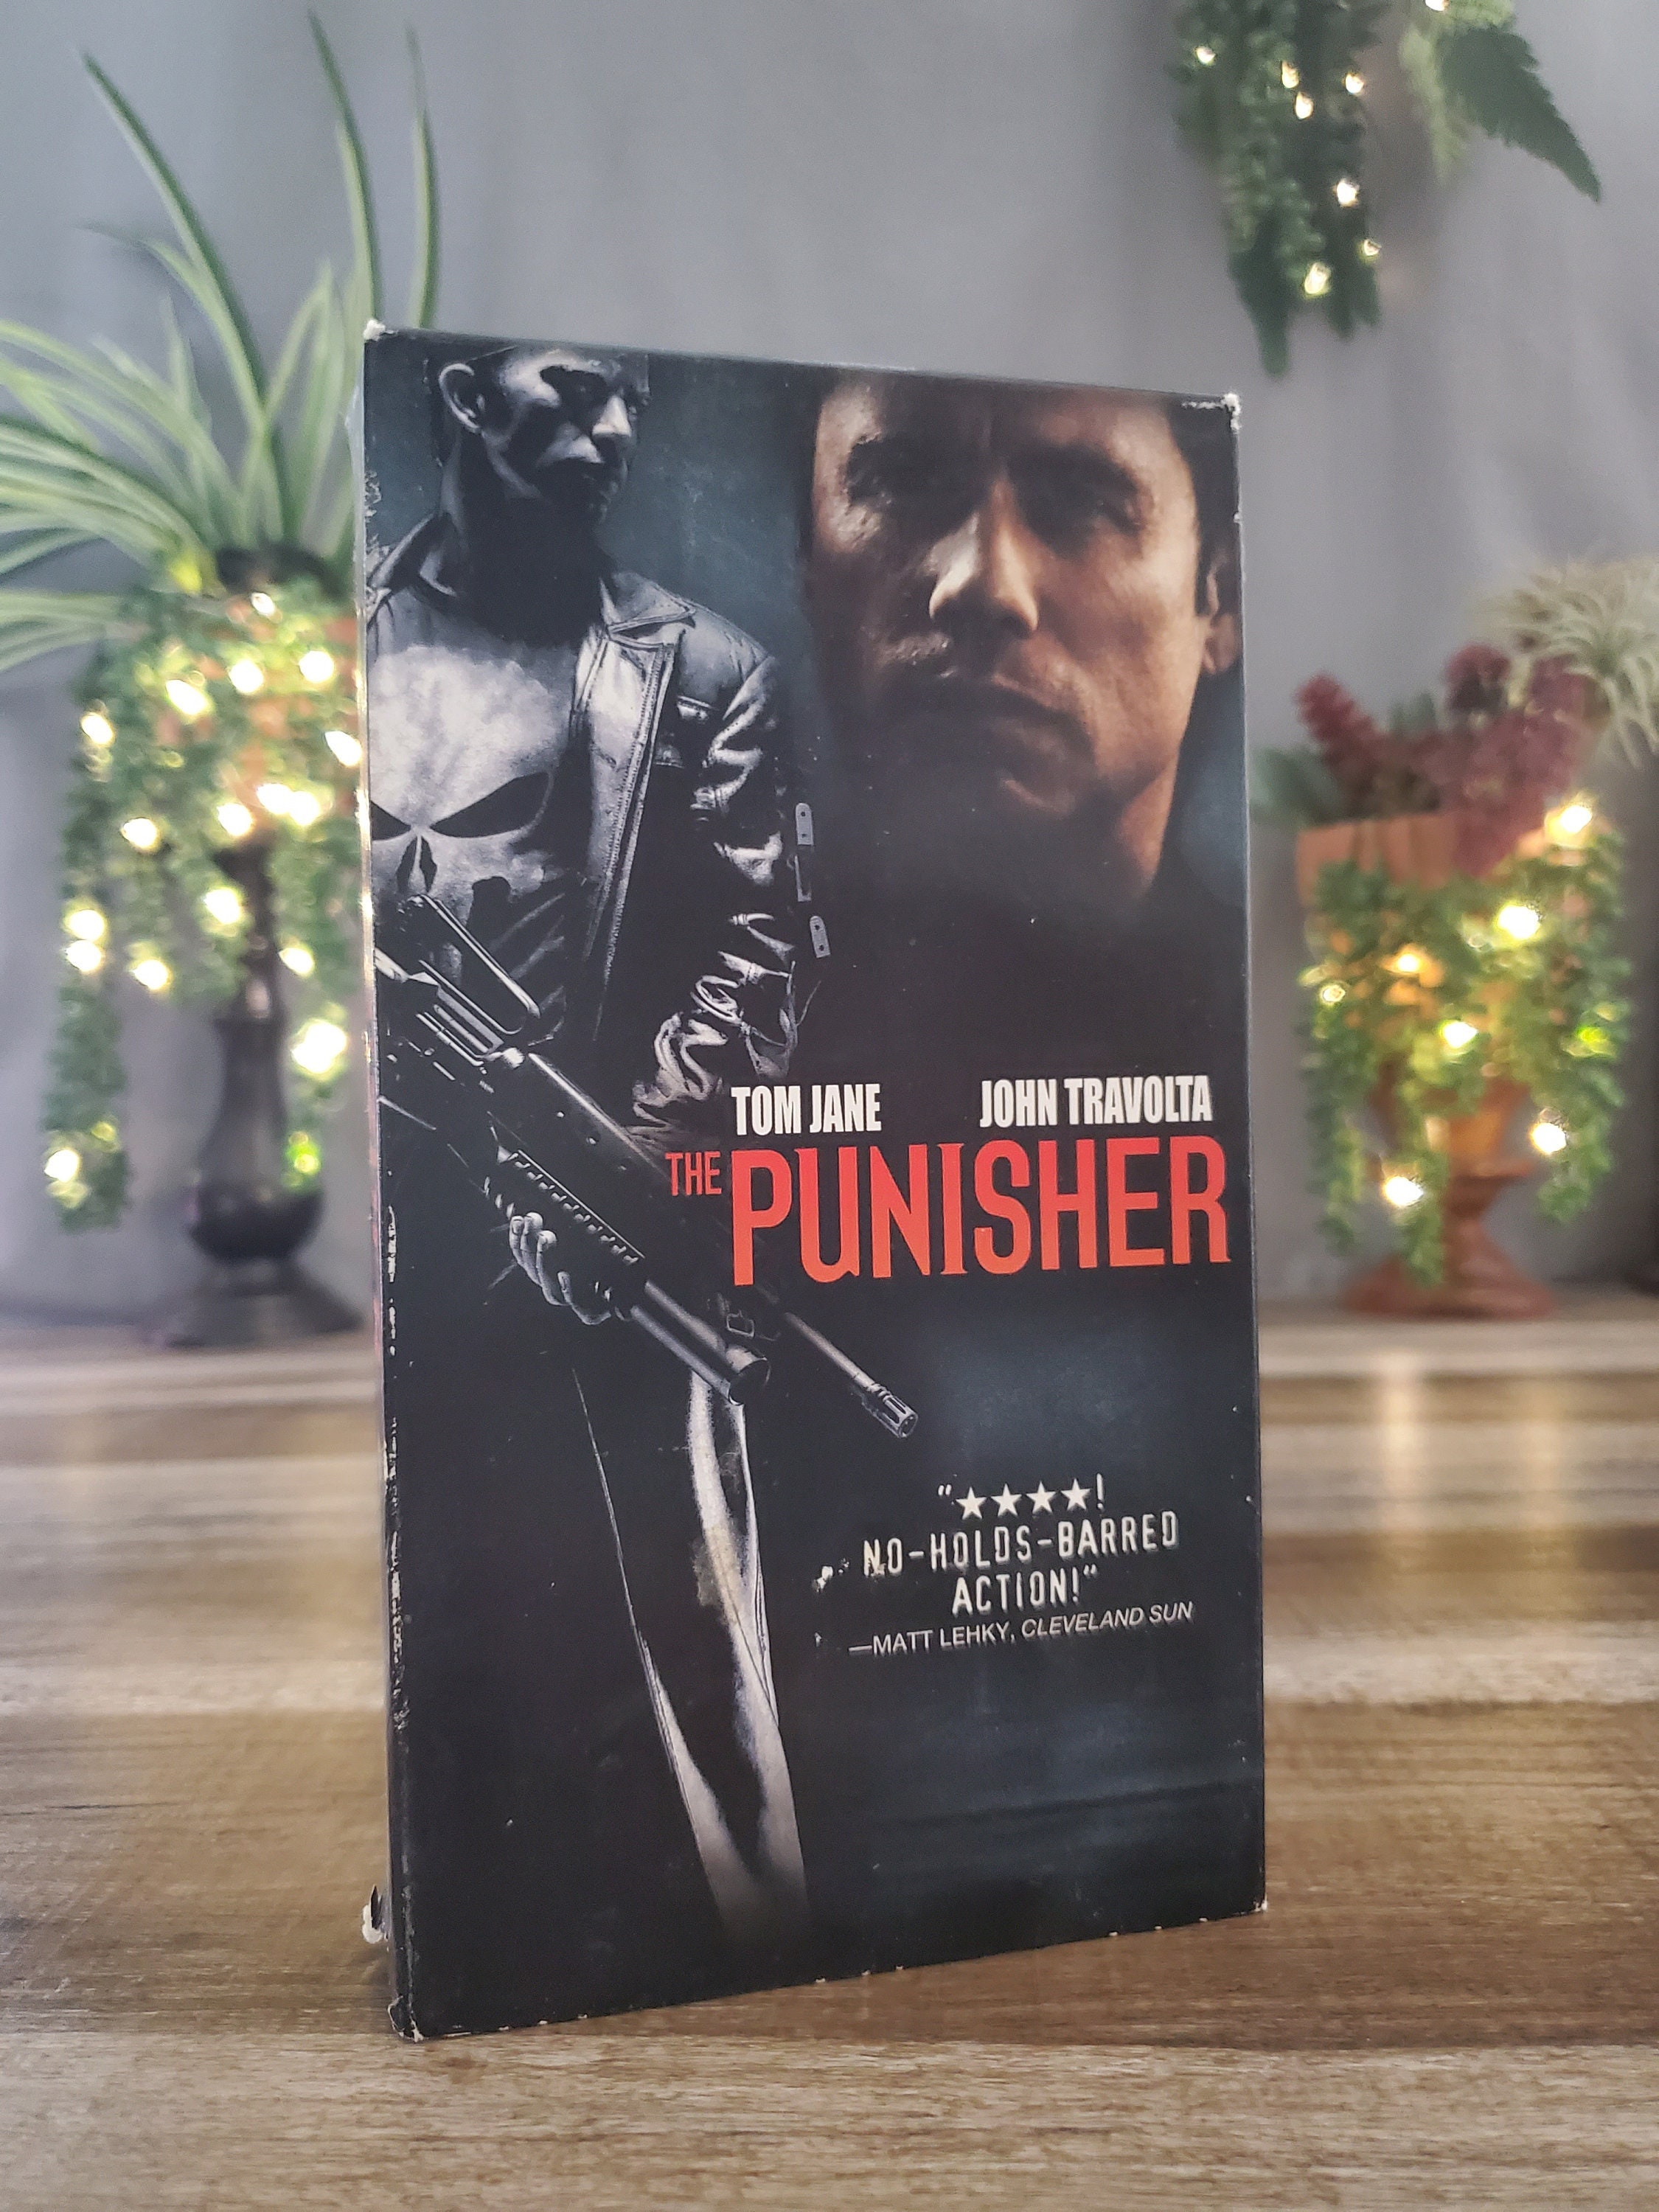 2004 The Punisher PS2 Playstation 2 PS2 Xbox PC Vintage Print Ad/Poster  Game Art